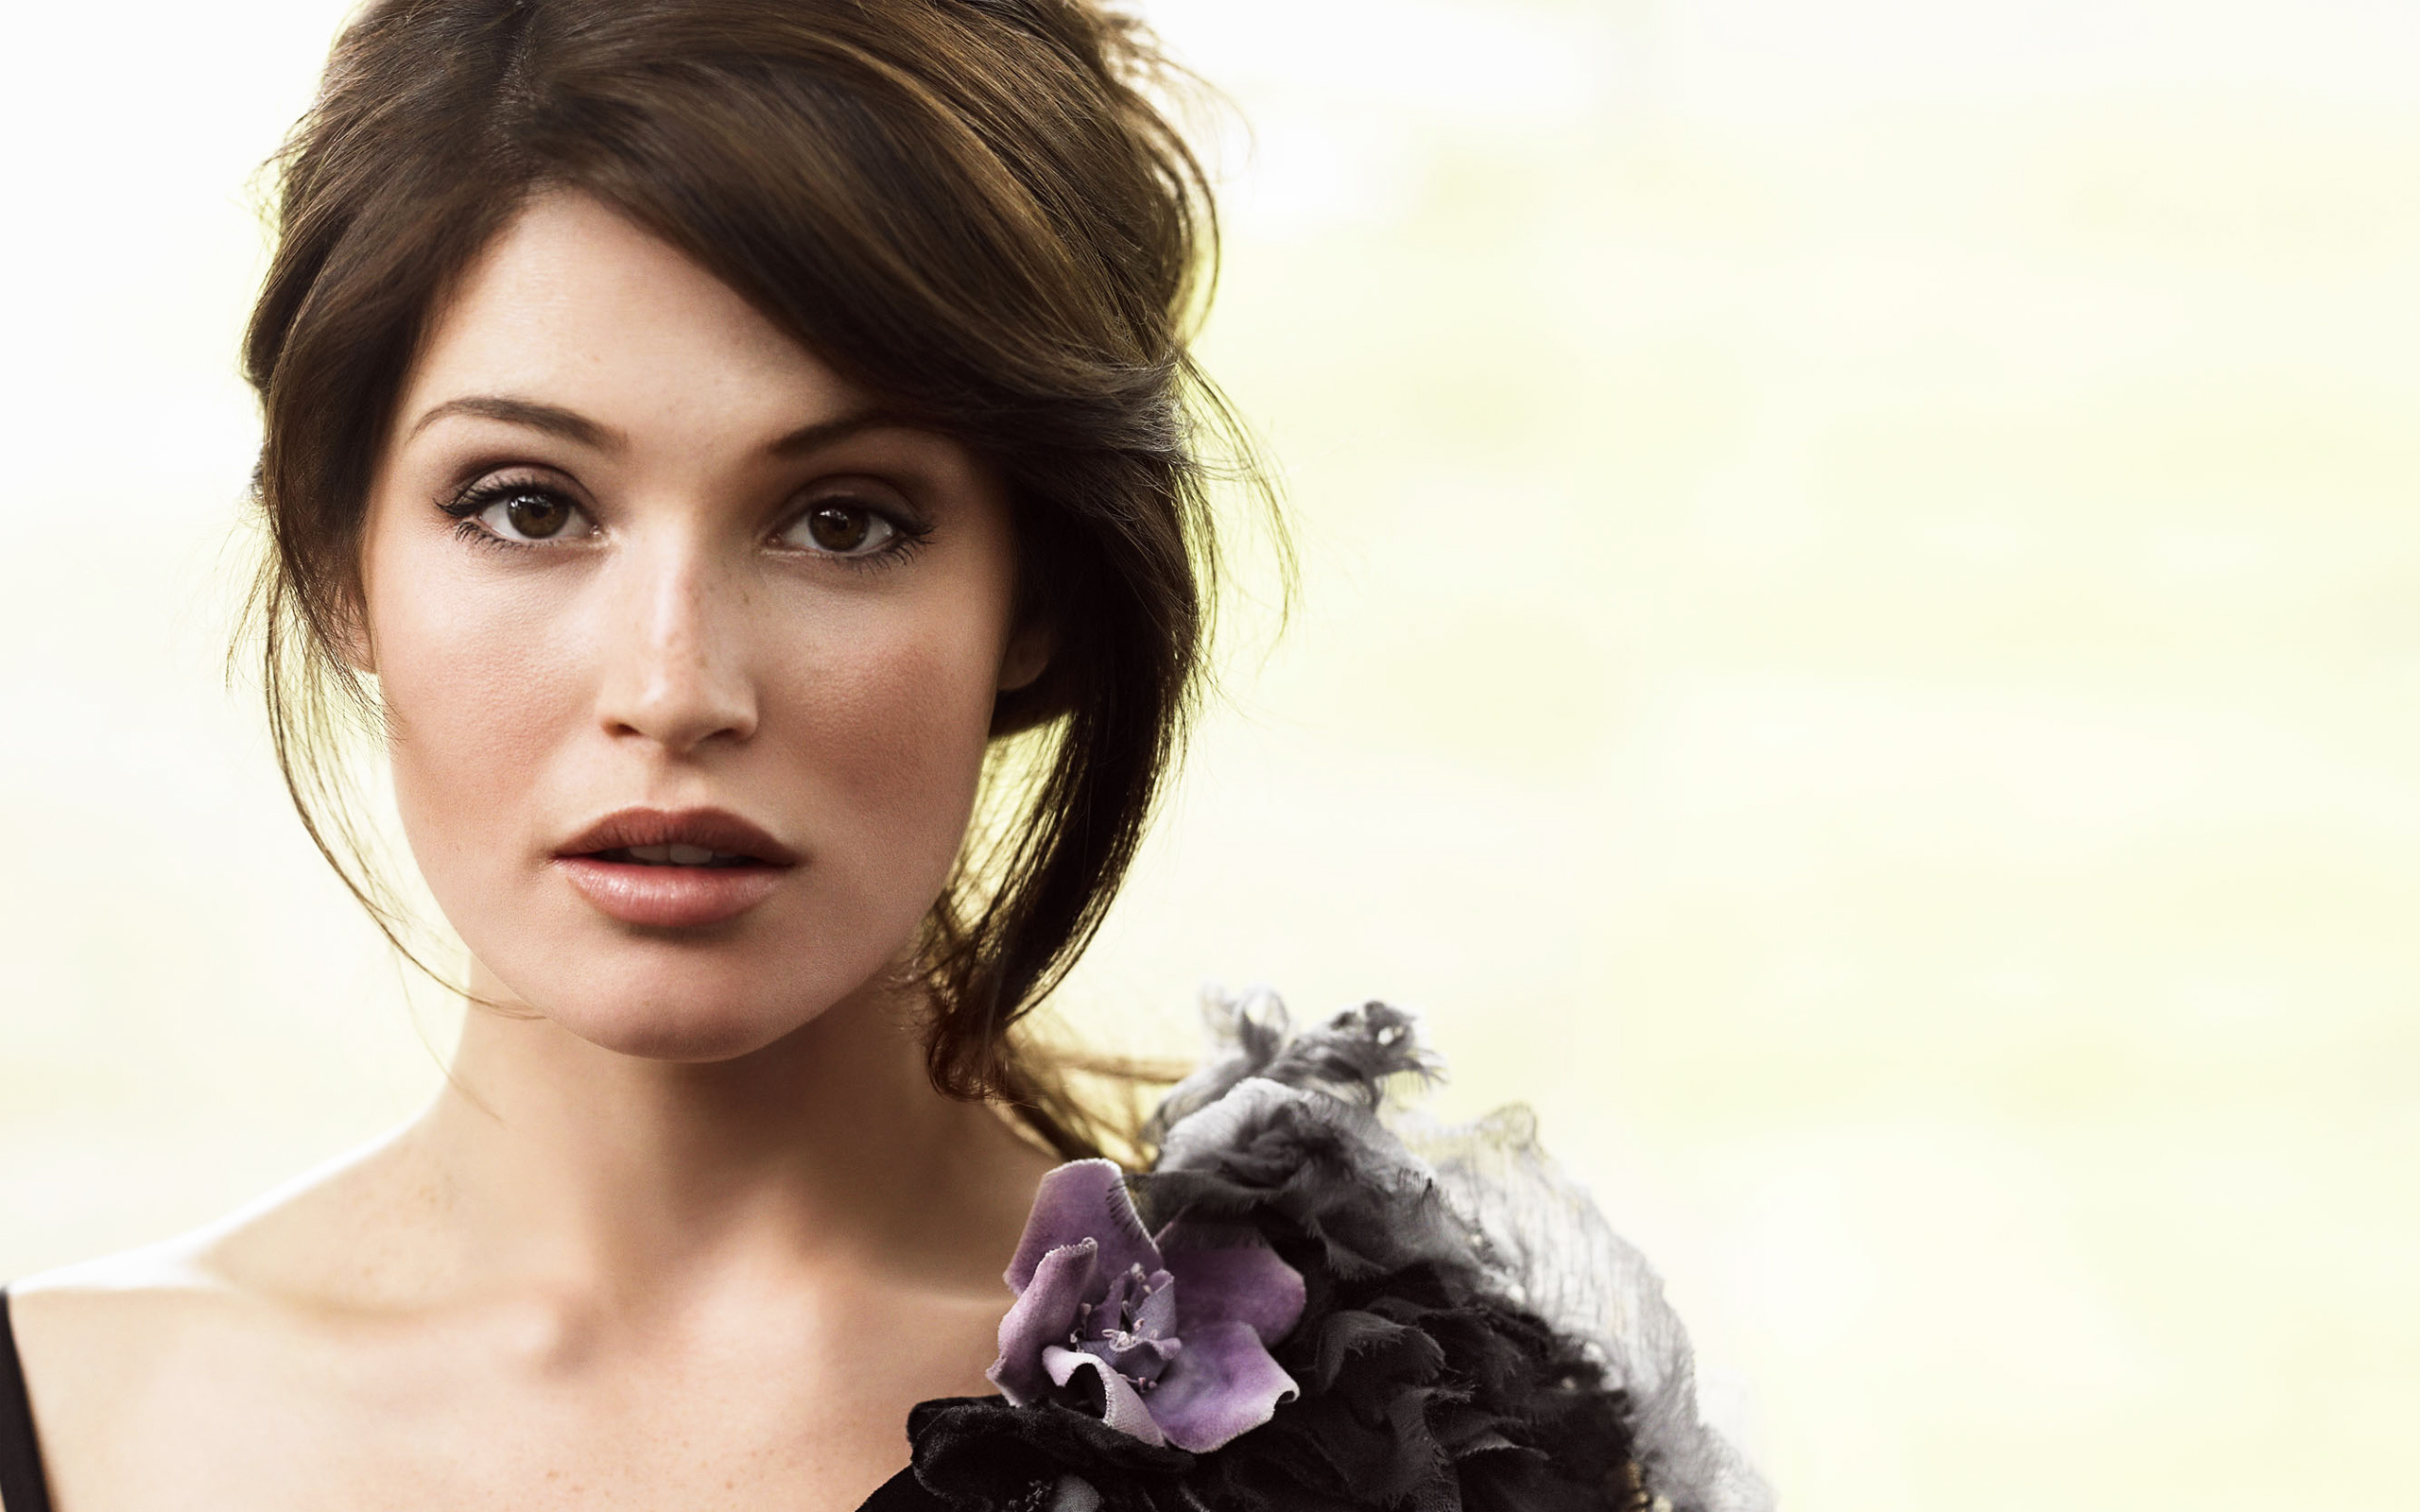 Gemma Arterton: Appeared in pivotal roles in the 2010 films Clash of the Titans and Prince of Persia: The Sands of Time. 2560x1600 HD Wallpaper.